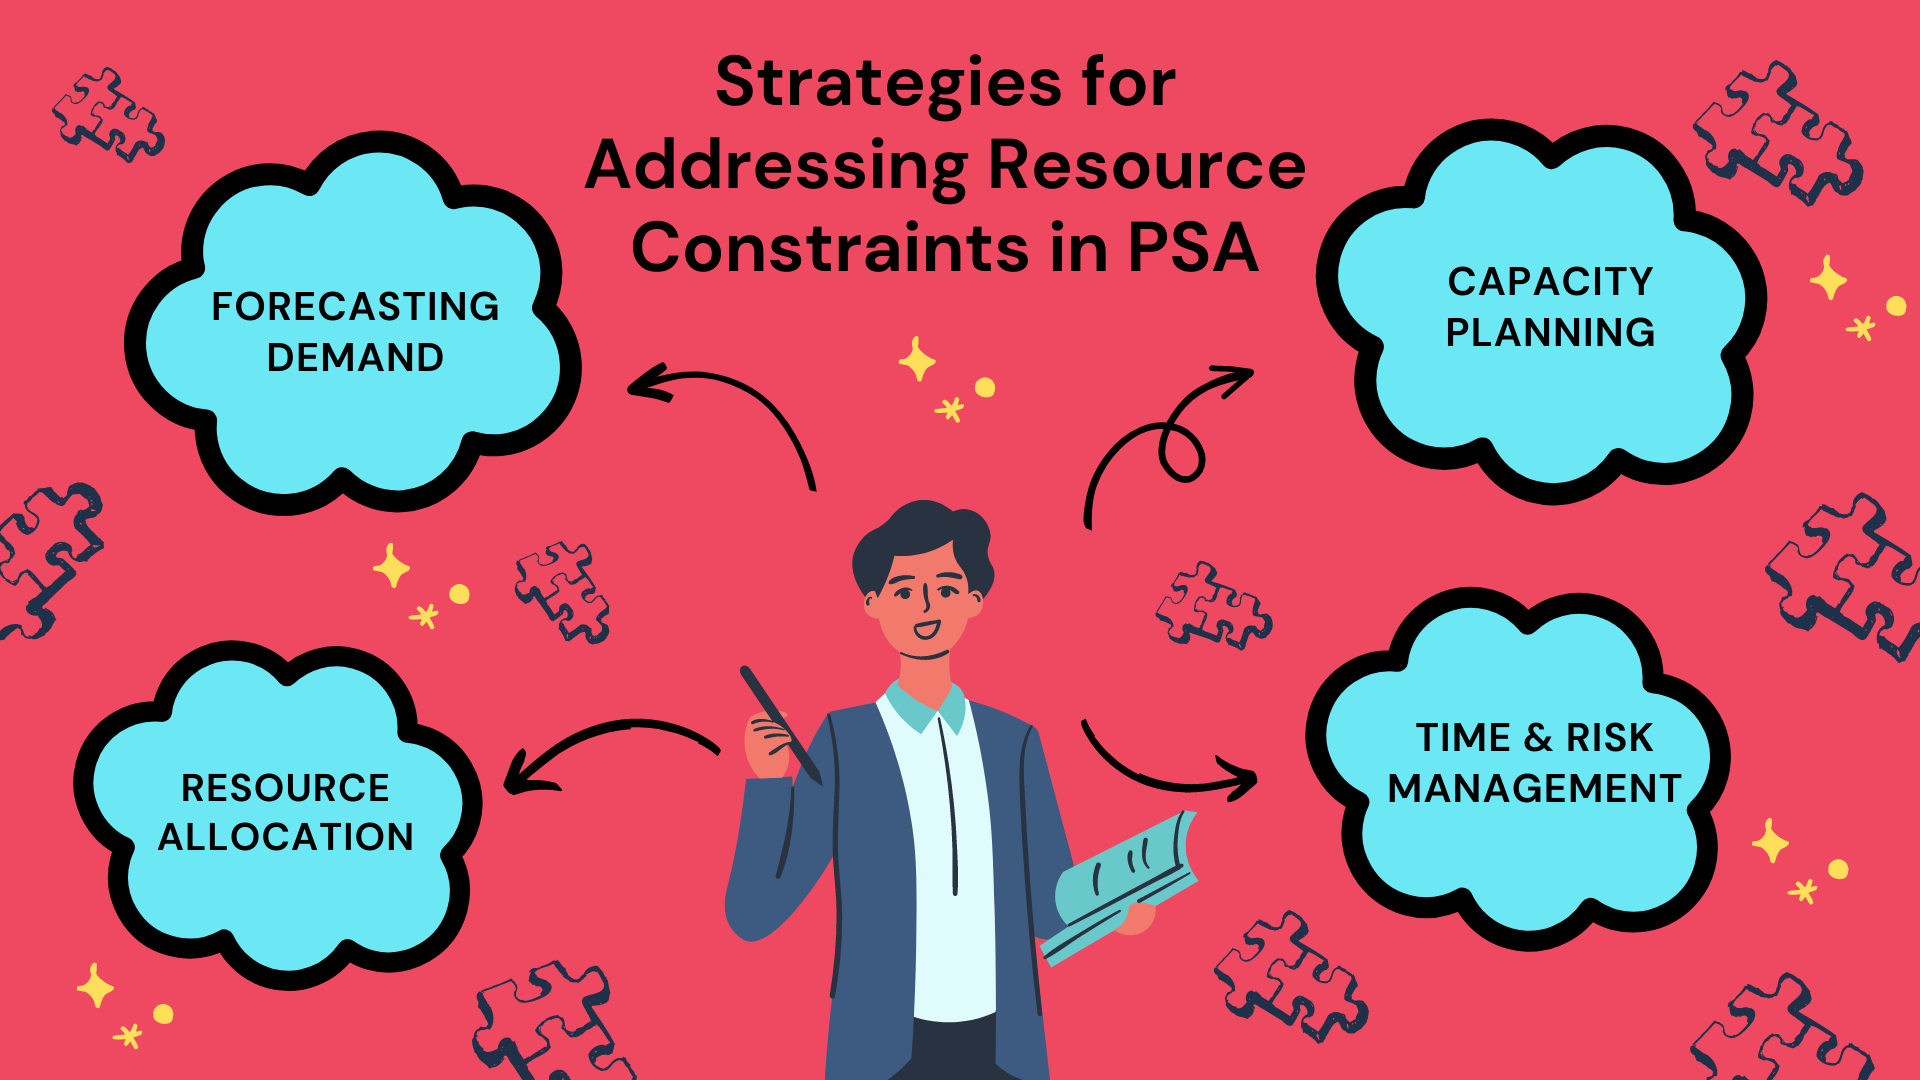 Strategies for Addressing Resource Constraints in PSA